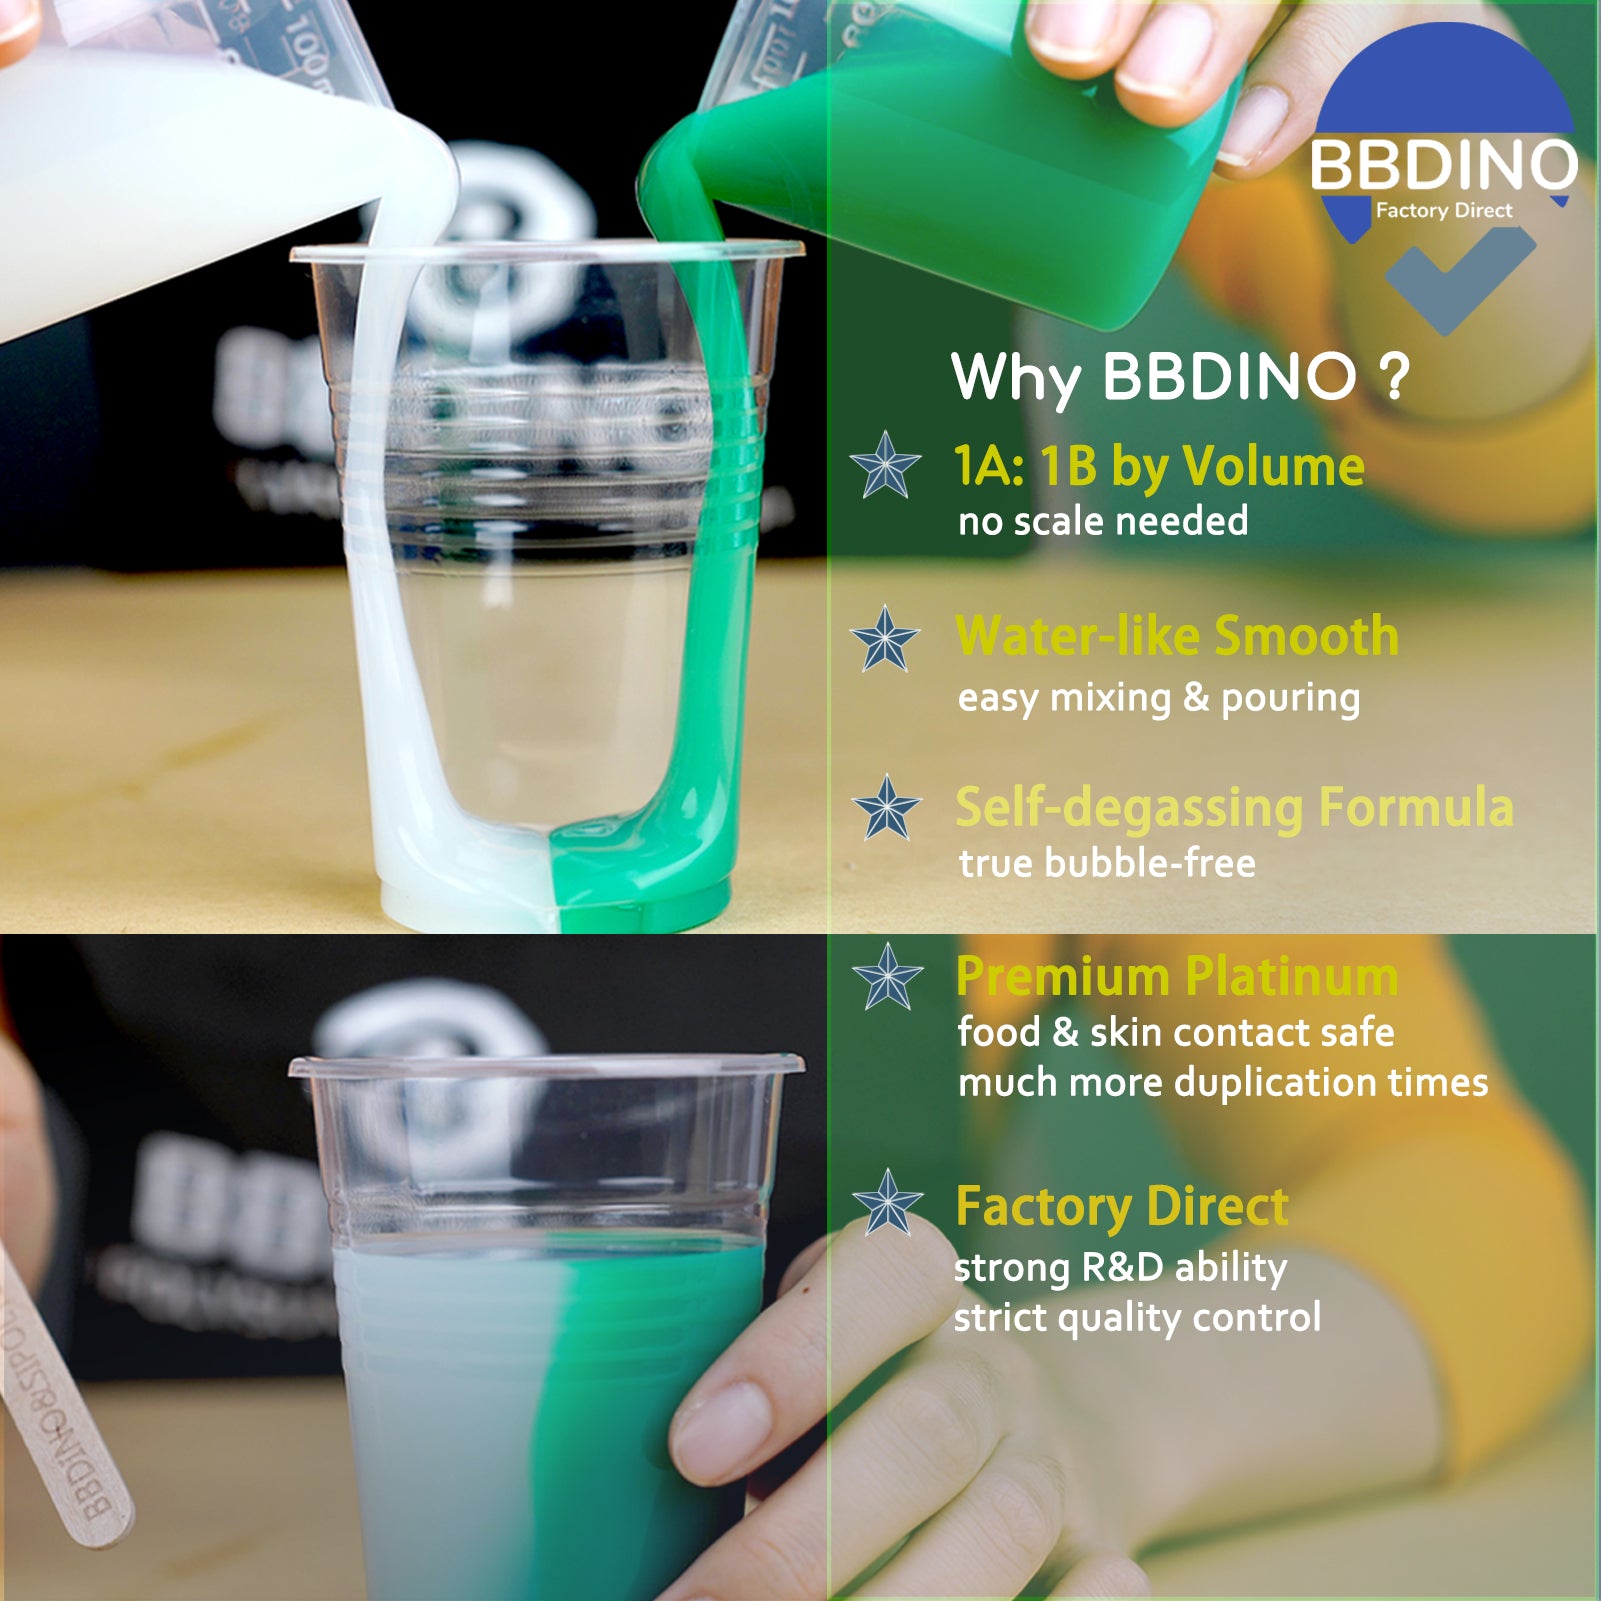 BBDINO Silicone Mold Making Kit, Mold Making Silicone Rubber 30A Liquid  Silicone for Mold Making 1 Gallon/10 Lbs,1:1 by Volume, Ideal for Silicone